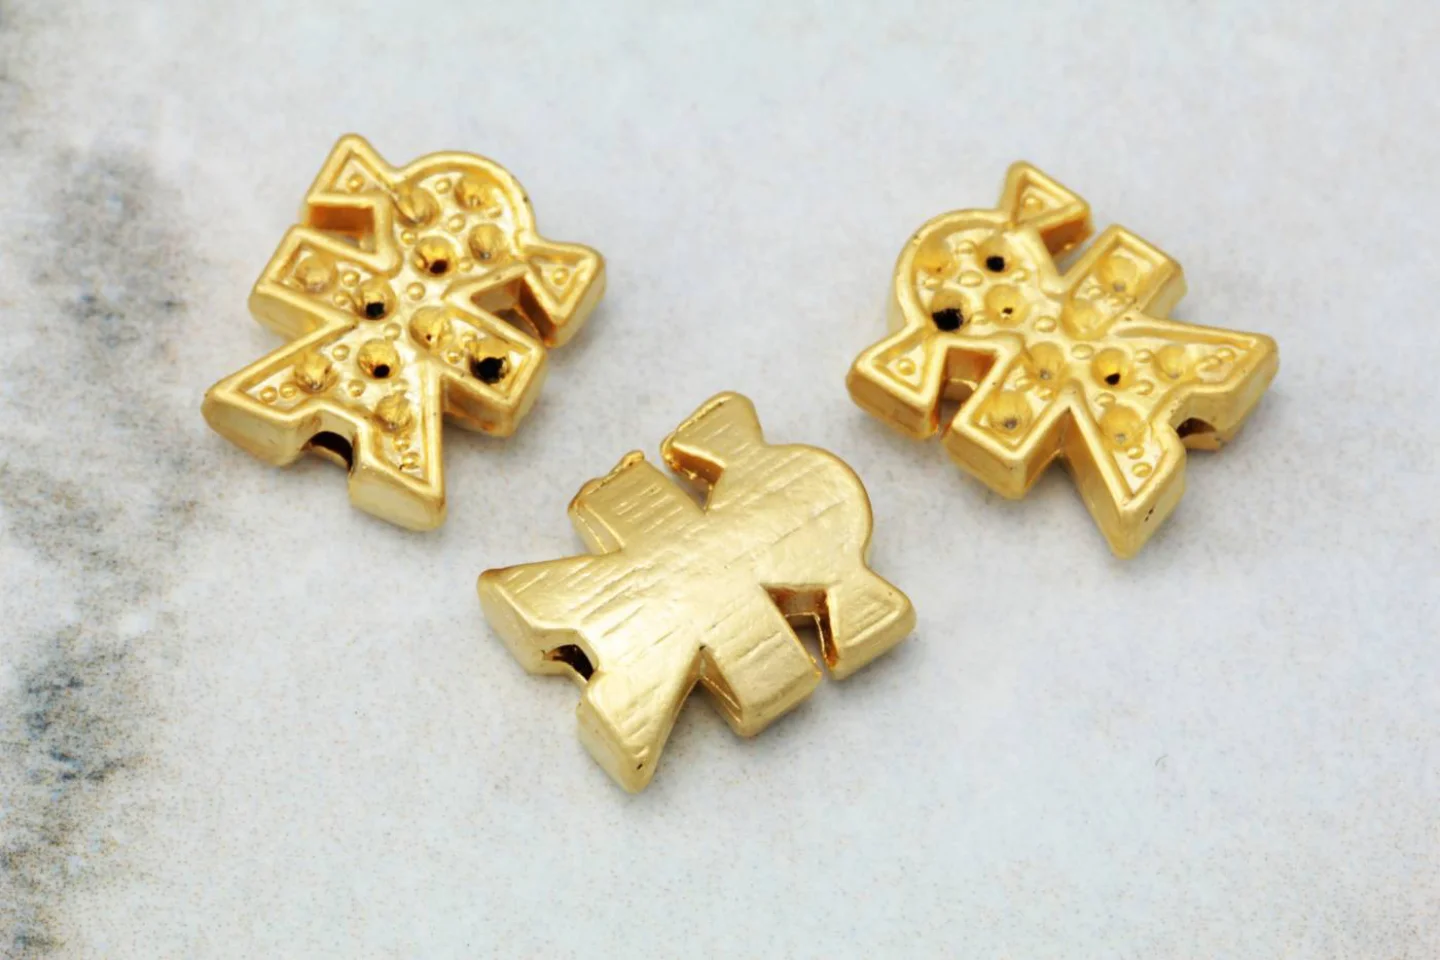 gold-girl-charms-cchange-jewelry-charms.